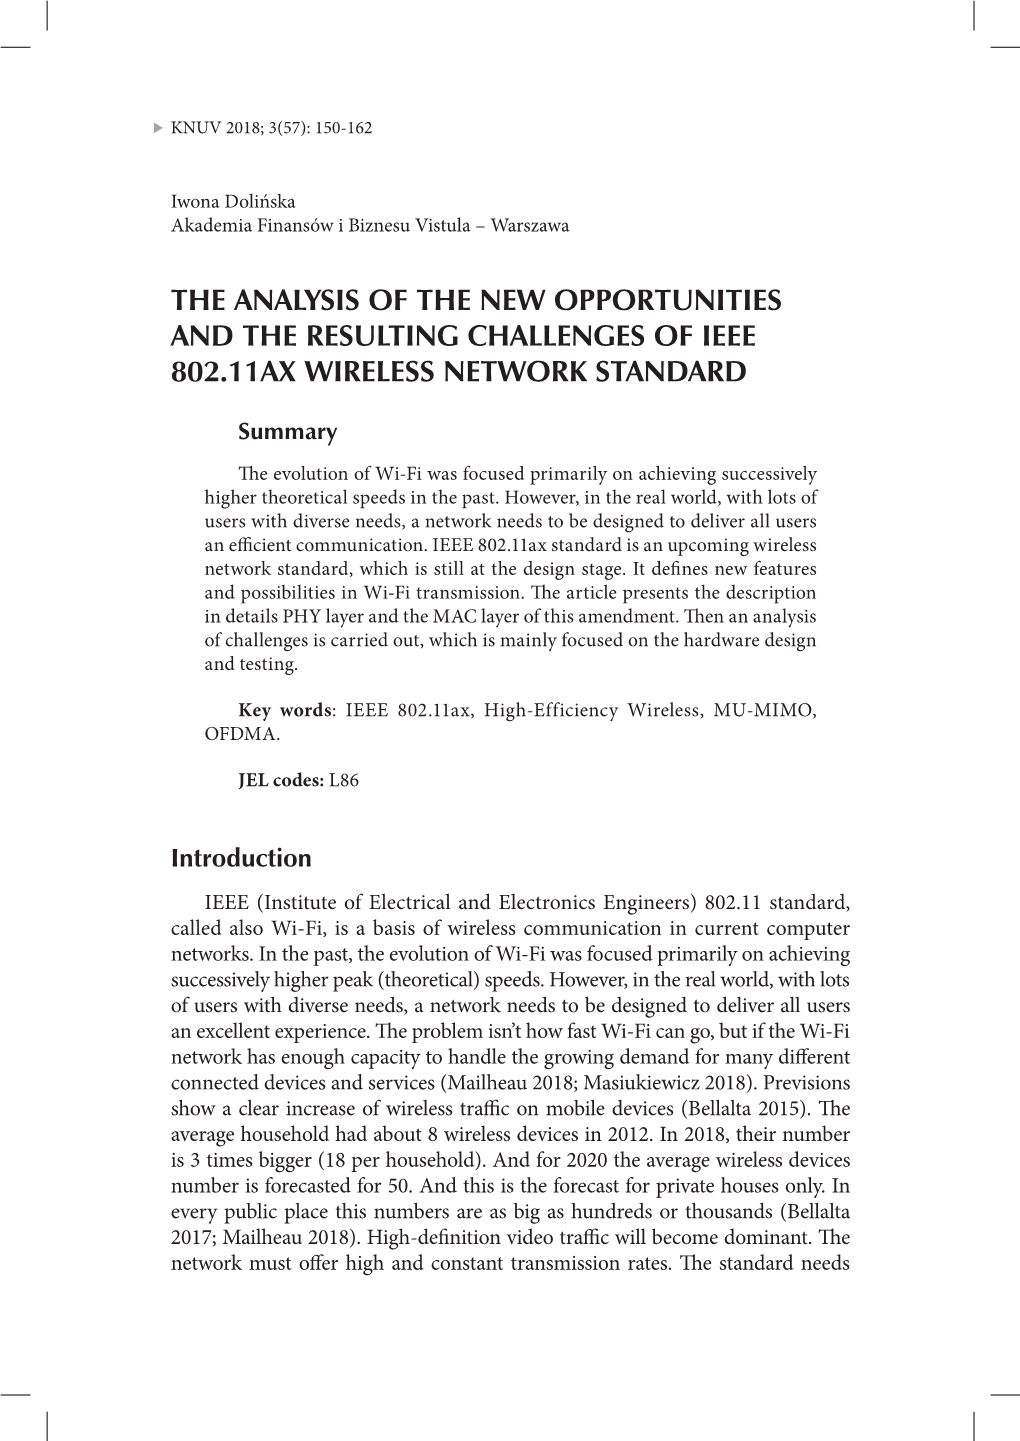 The Analysis of the New Opportunities and the Resulting Challenges of IEEE 802.11Ax Wireless Network Standard